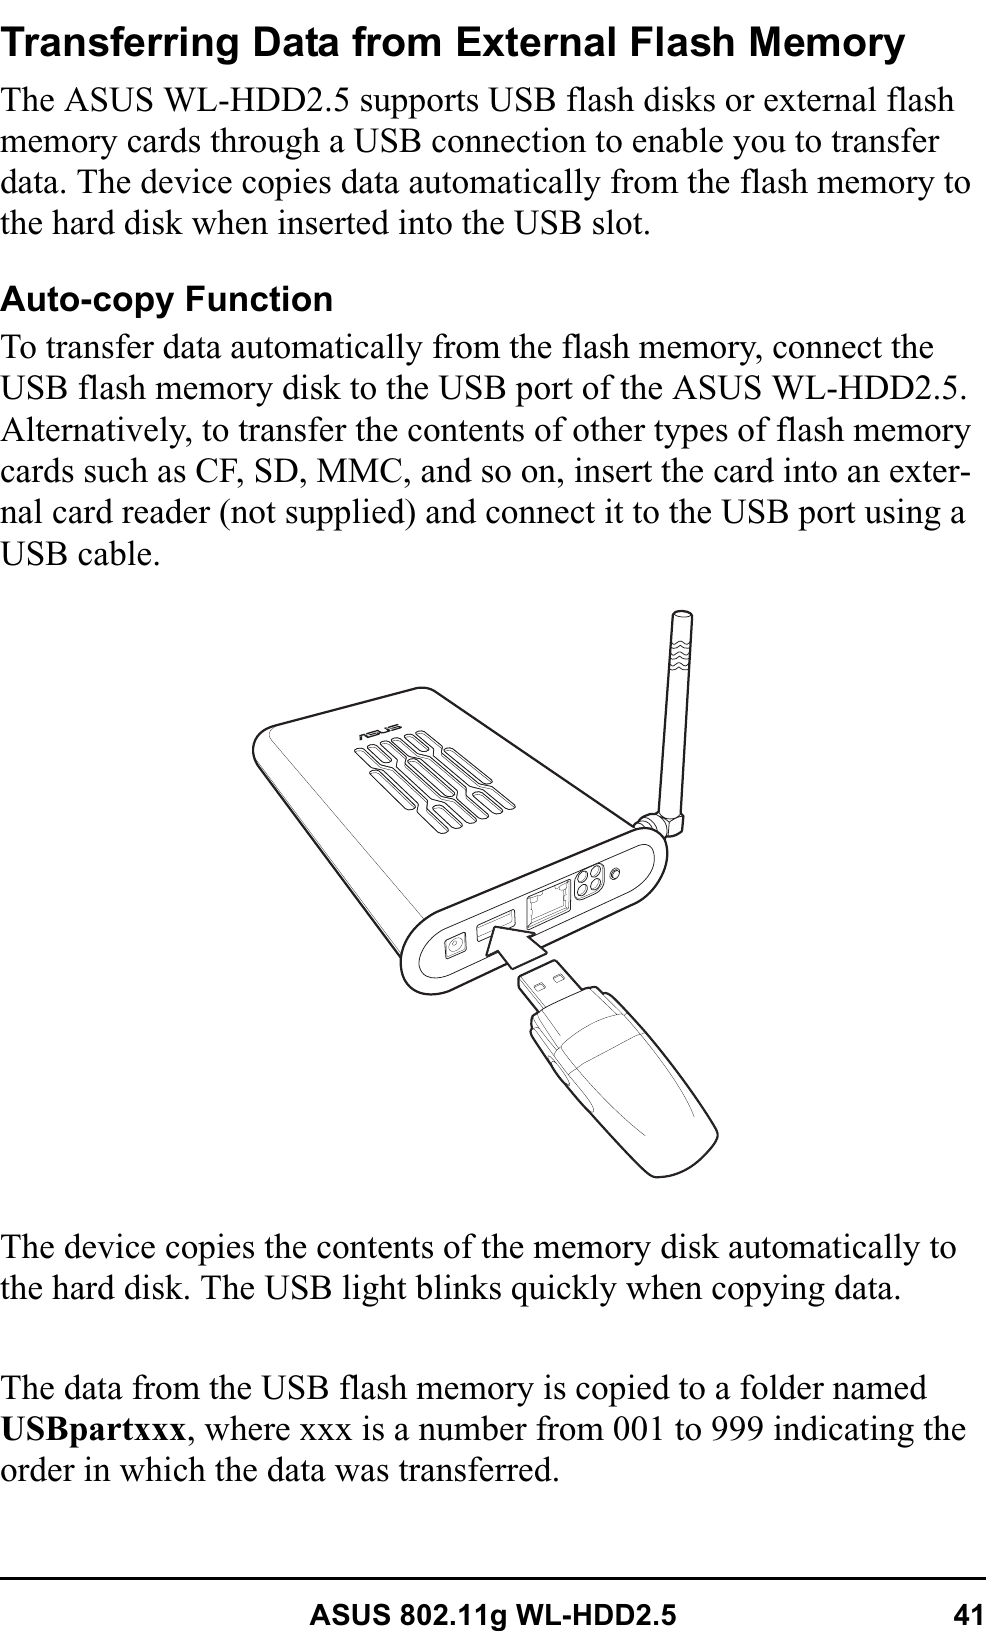 ASUS 802.11g WL-HDD2.5 41Transferring Data from External Flash MemoryThe ASUS WL-HDD2.5 supports USB flash disks or external flash memory cards through a USB connection to enable you to transfer data. The device copies data automatically from the flash memory to the hard disk when inserted into the USB slot.Auto-copy FunctionTo transfer data automatically from the flash memory, connect the USB flash memory disk to the USB port of the ASUS WL-HDD2.5. Alternatively, to transfer the contents of other types of flash memory cards such as CF, SD, MMC, and so on, insert the card into an exter-nal card reader (not supplied) and connect it to the USB port using a USB cable.The device copies the contents of the memory disk automatically to the hard disk. The USB light blinks quickly when copying data.The data from the USB flash memory is copied to a folder named USBpartxxx, where xxx is a number from 001 to 999 indicating the order in which the data was transferred.